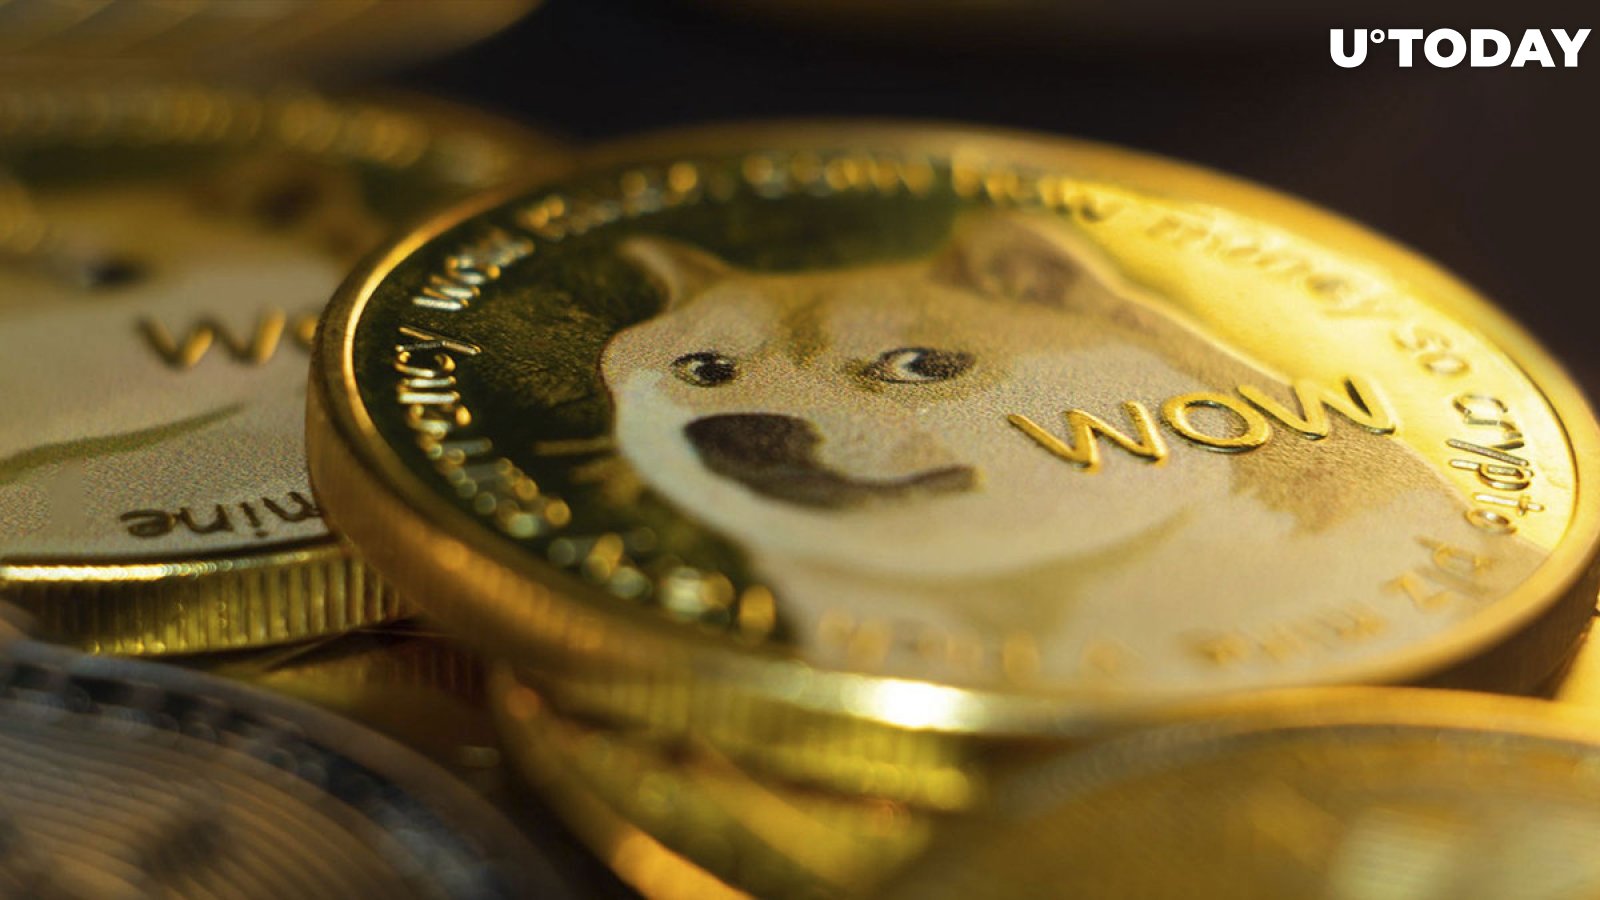 Dogecoin to $1? Top Trader Sets Sights on Ambitious Target